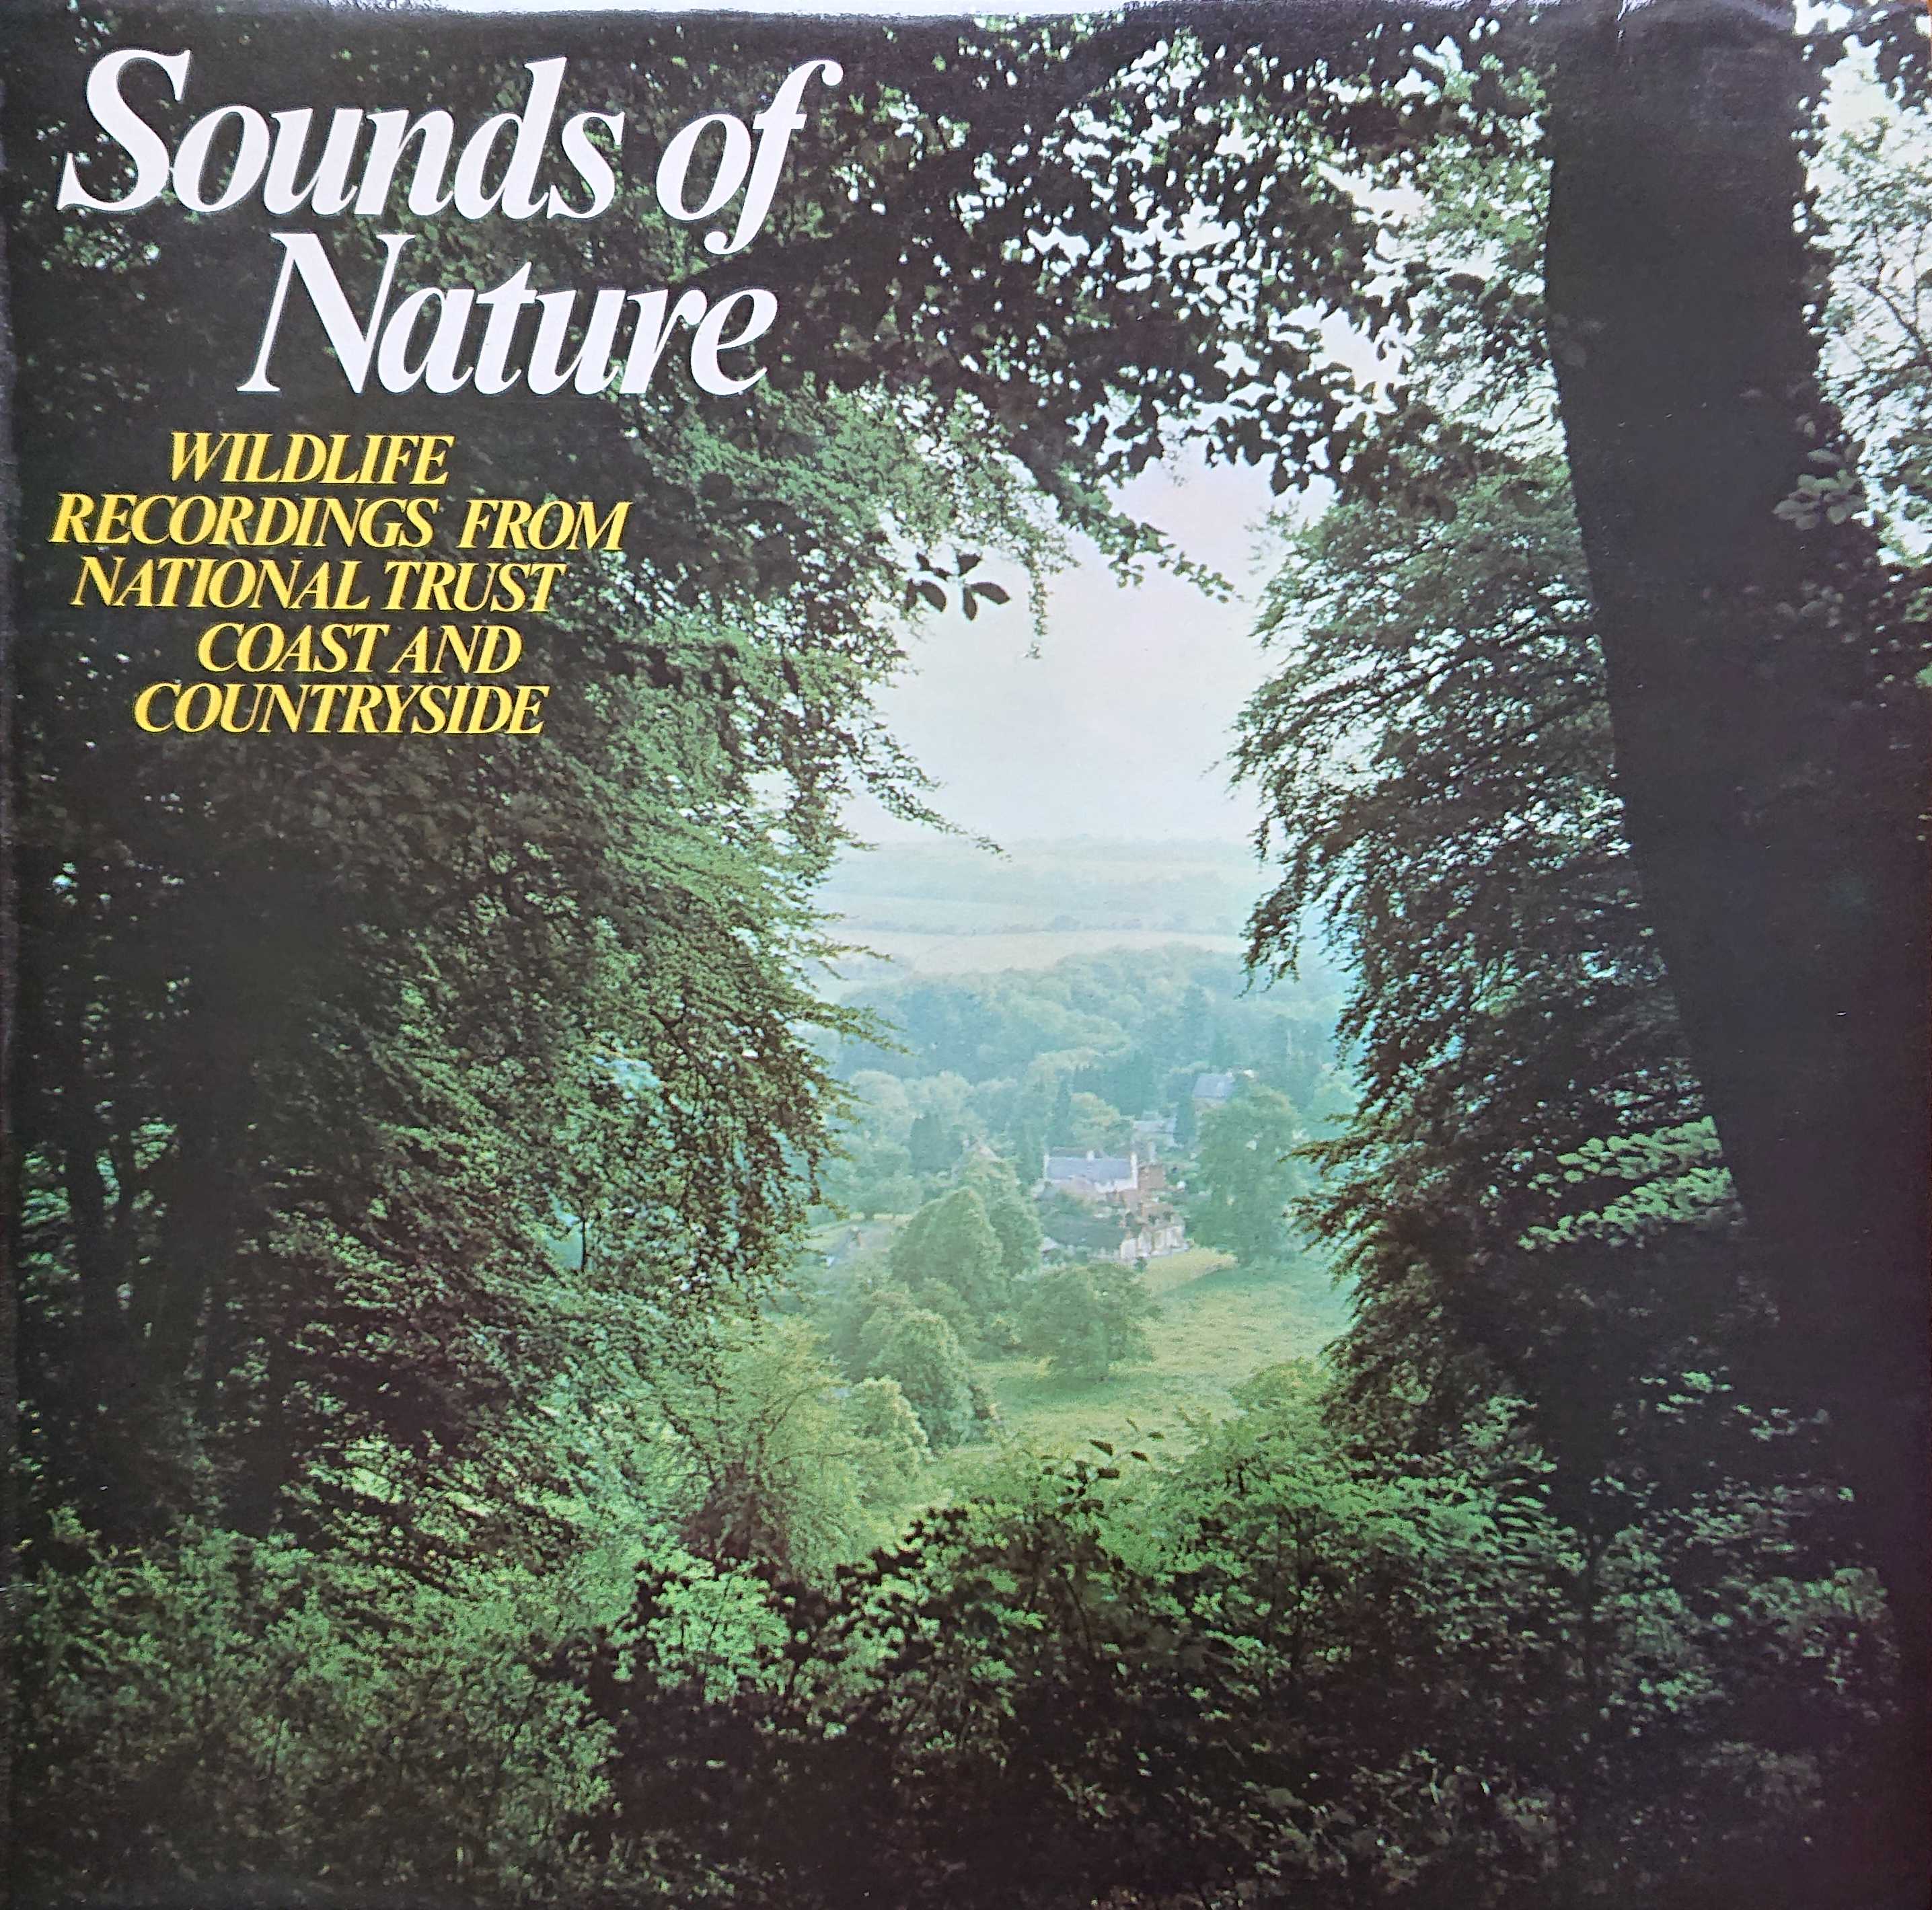 Picture of NT 001 Sounds of nature by artist Eric Simms from the BBC albums - Records and Tapes library